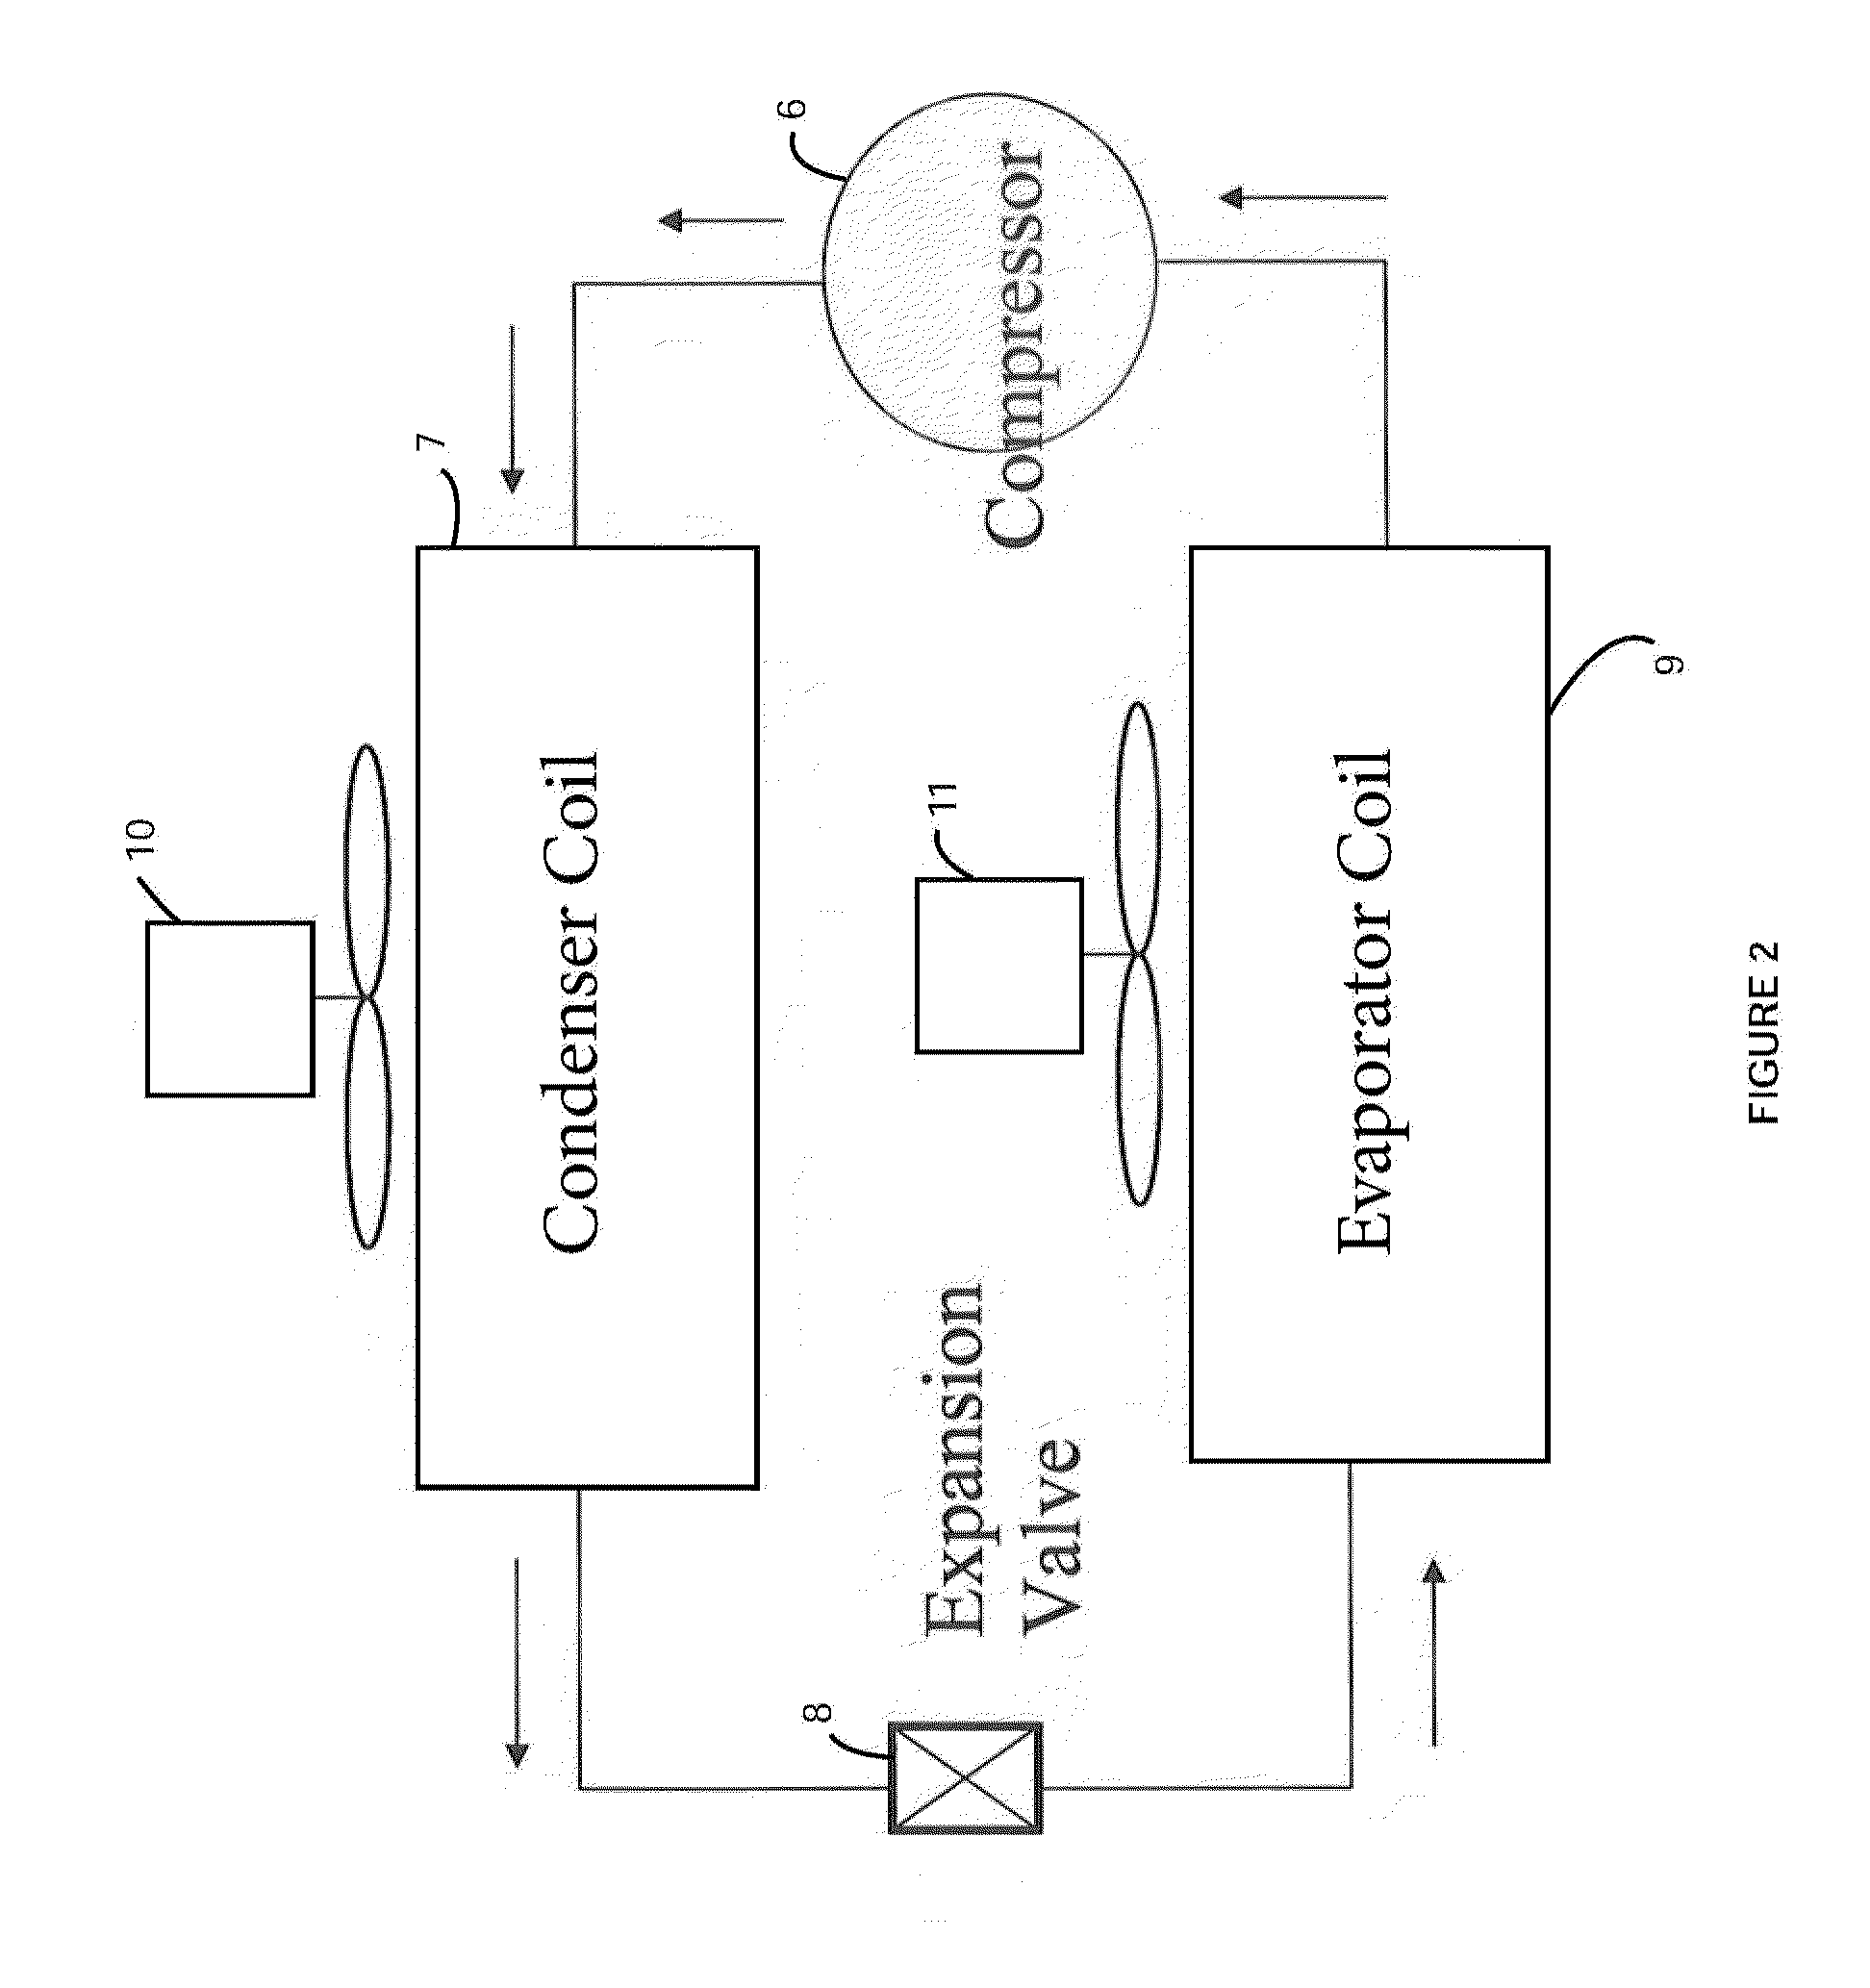 Energy Recovery Apparatus for a Refrigeration System